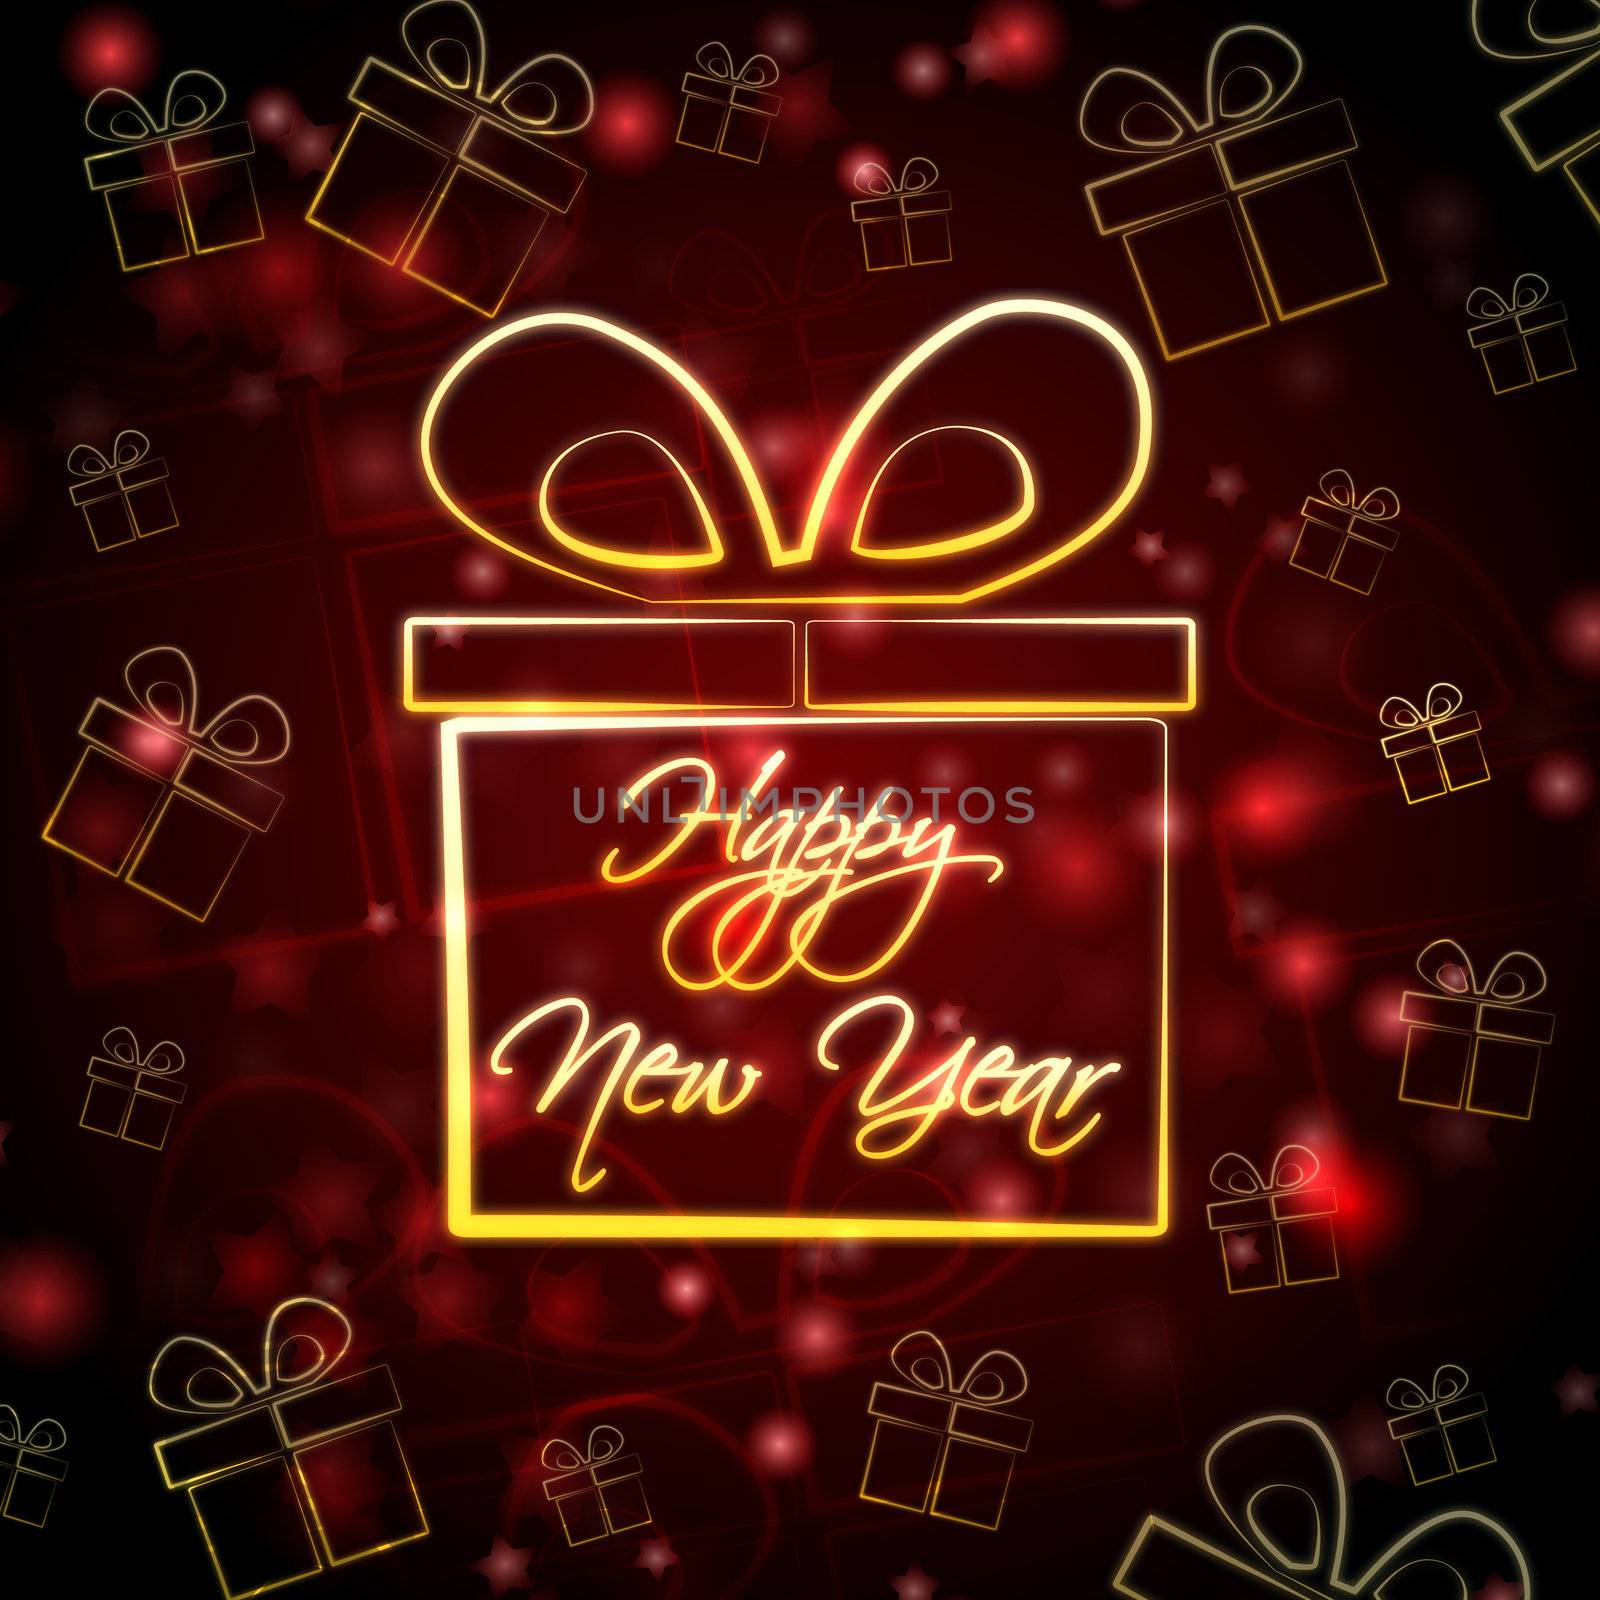 abstract red background card with golden presents boxes and text Happy New Year